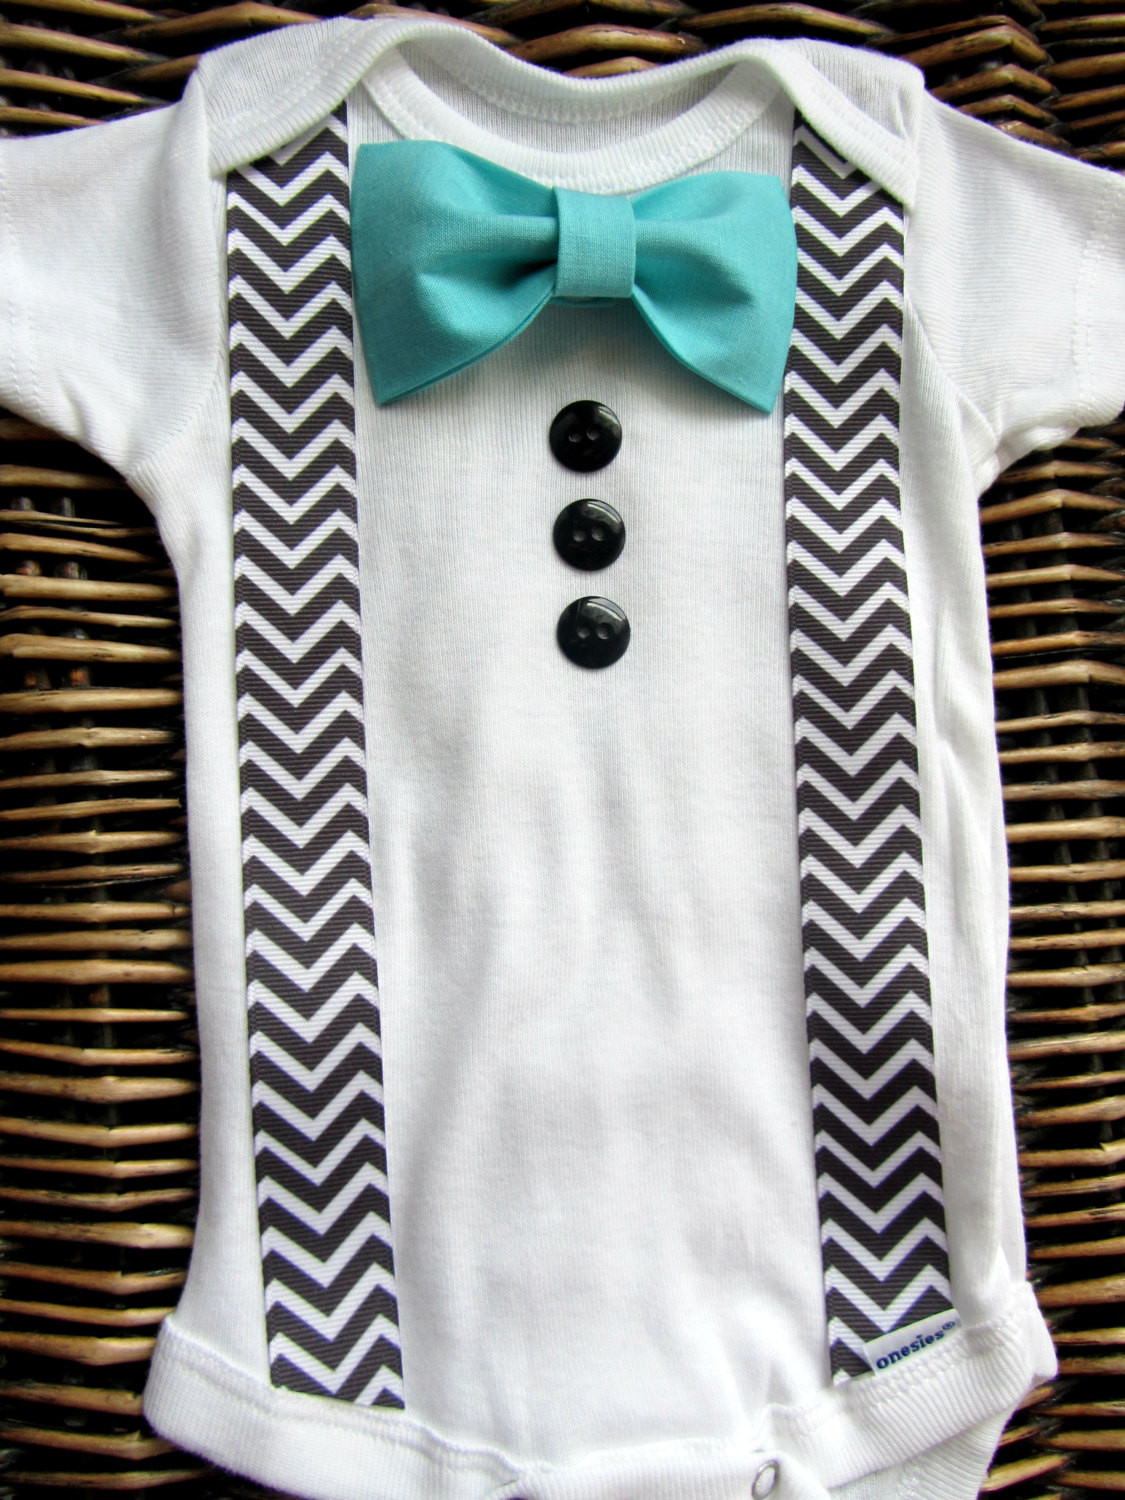 Diy Baby Boy Stuff
 Baby Boy Clothes Baby Bow Tie Infant Tuxedo ing Home